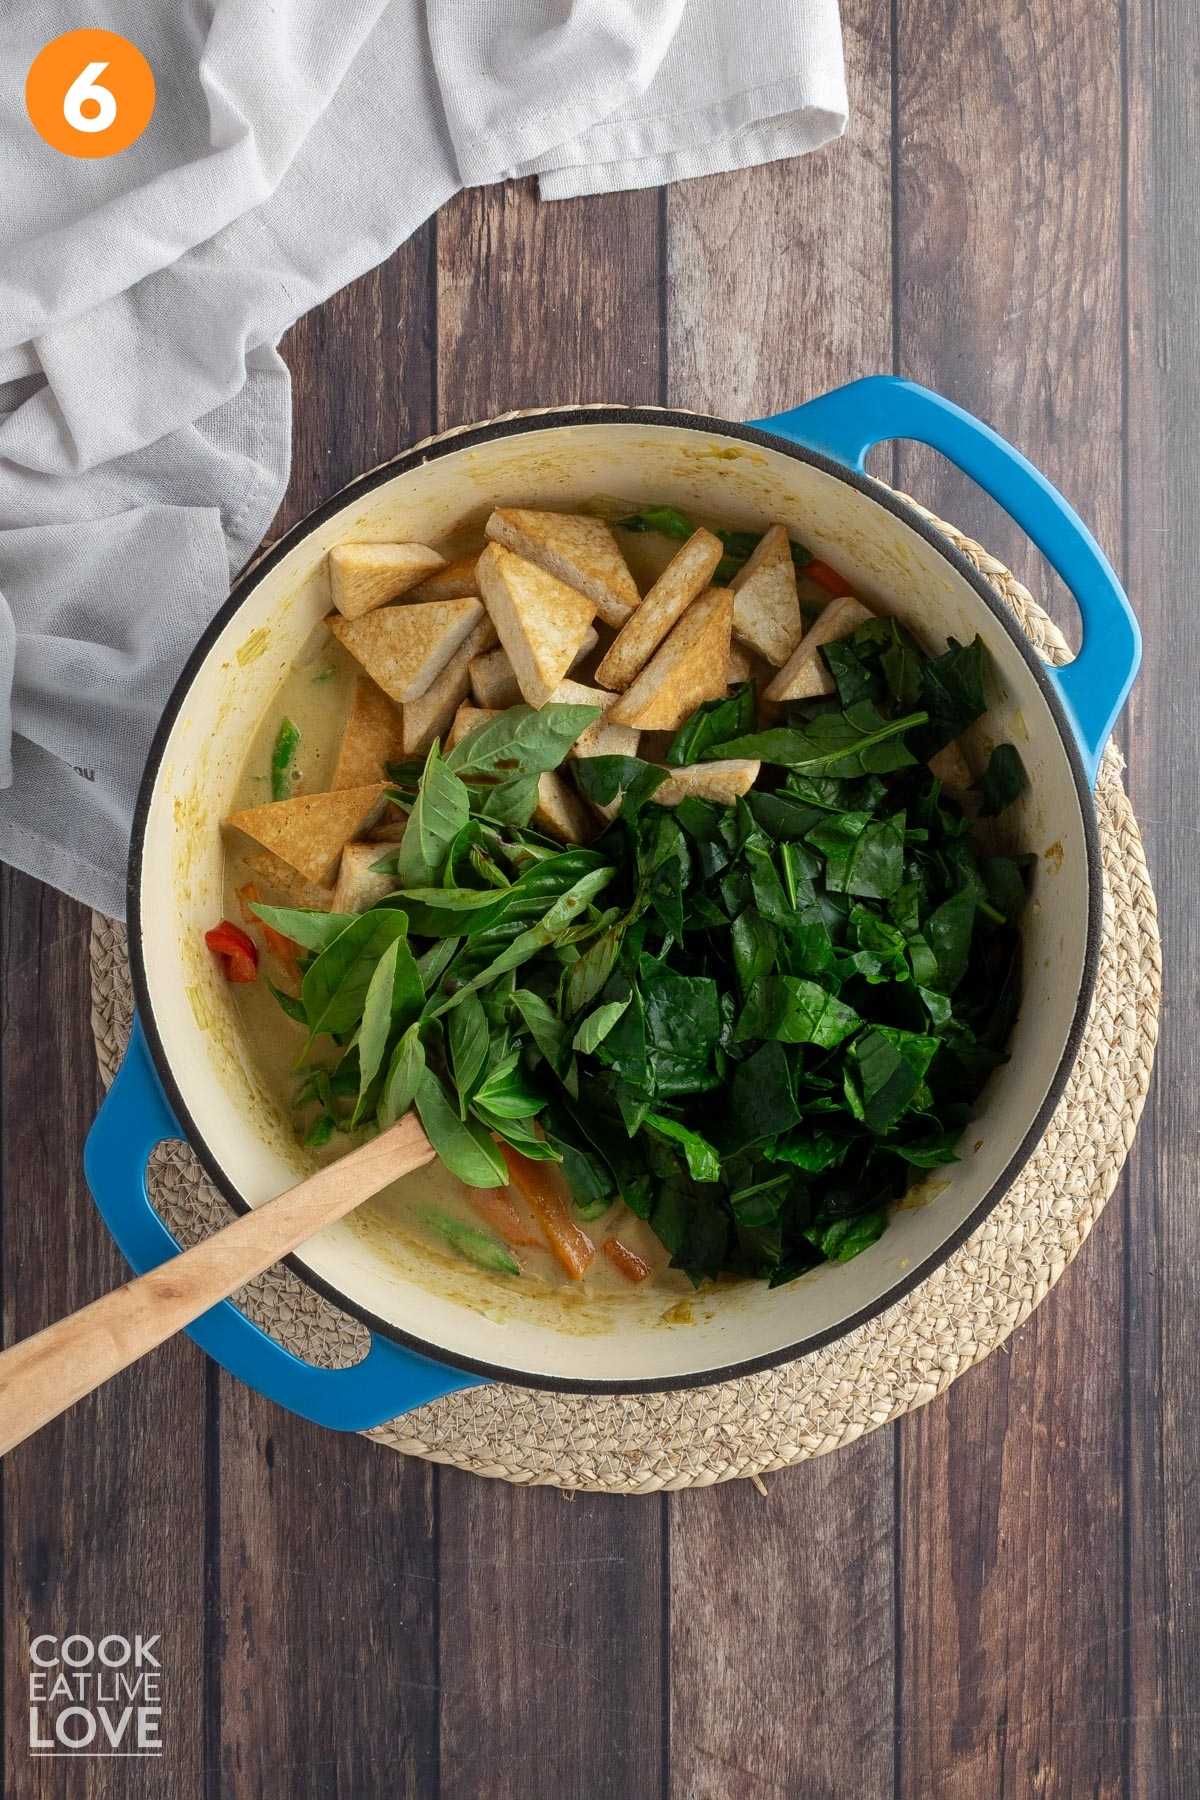 Spinach and tofu added to the pot of green curry.